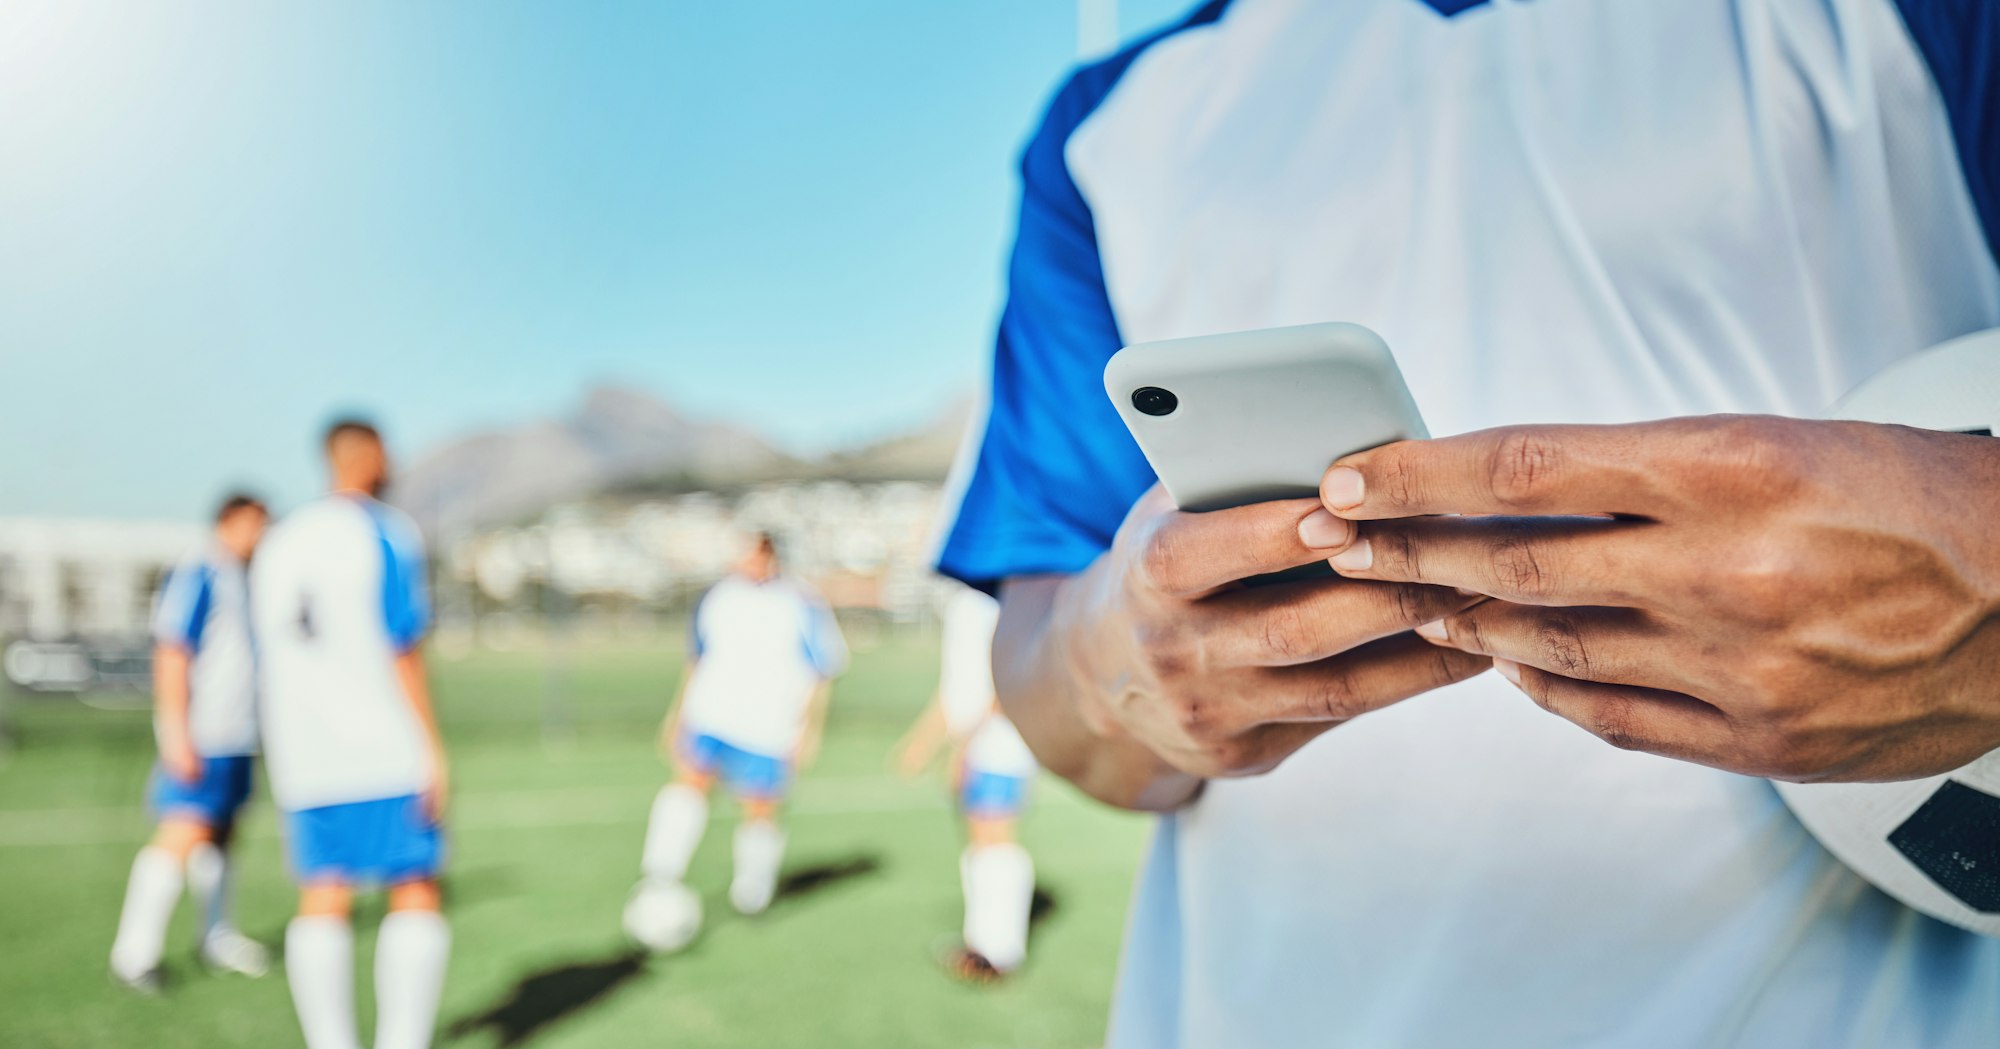 Football, field, phone and man hands for competition, training or fitness news, social media chat a